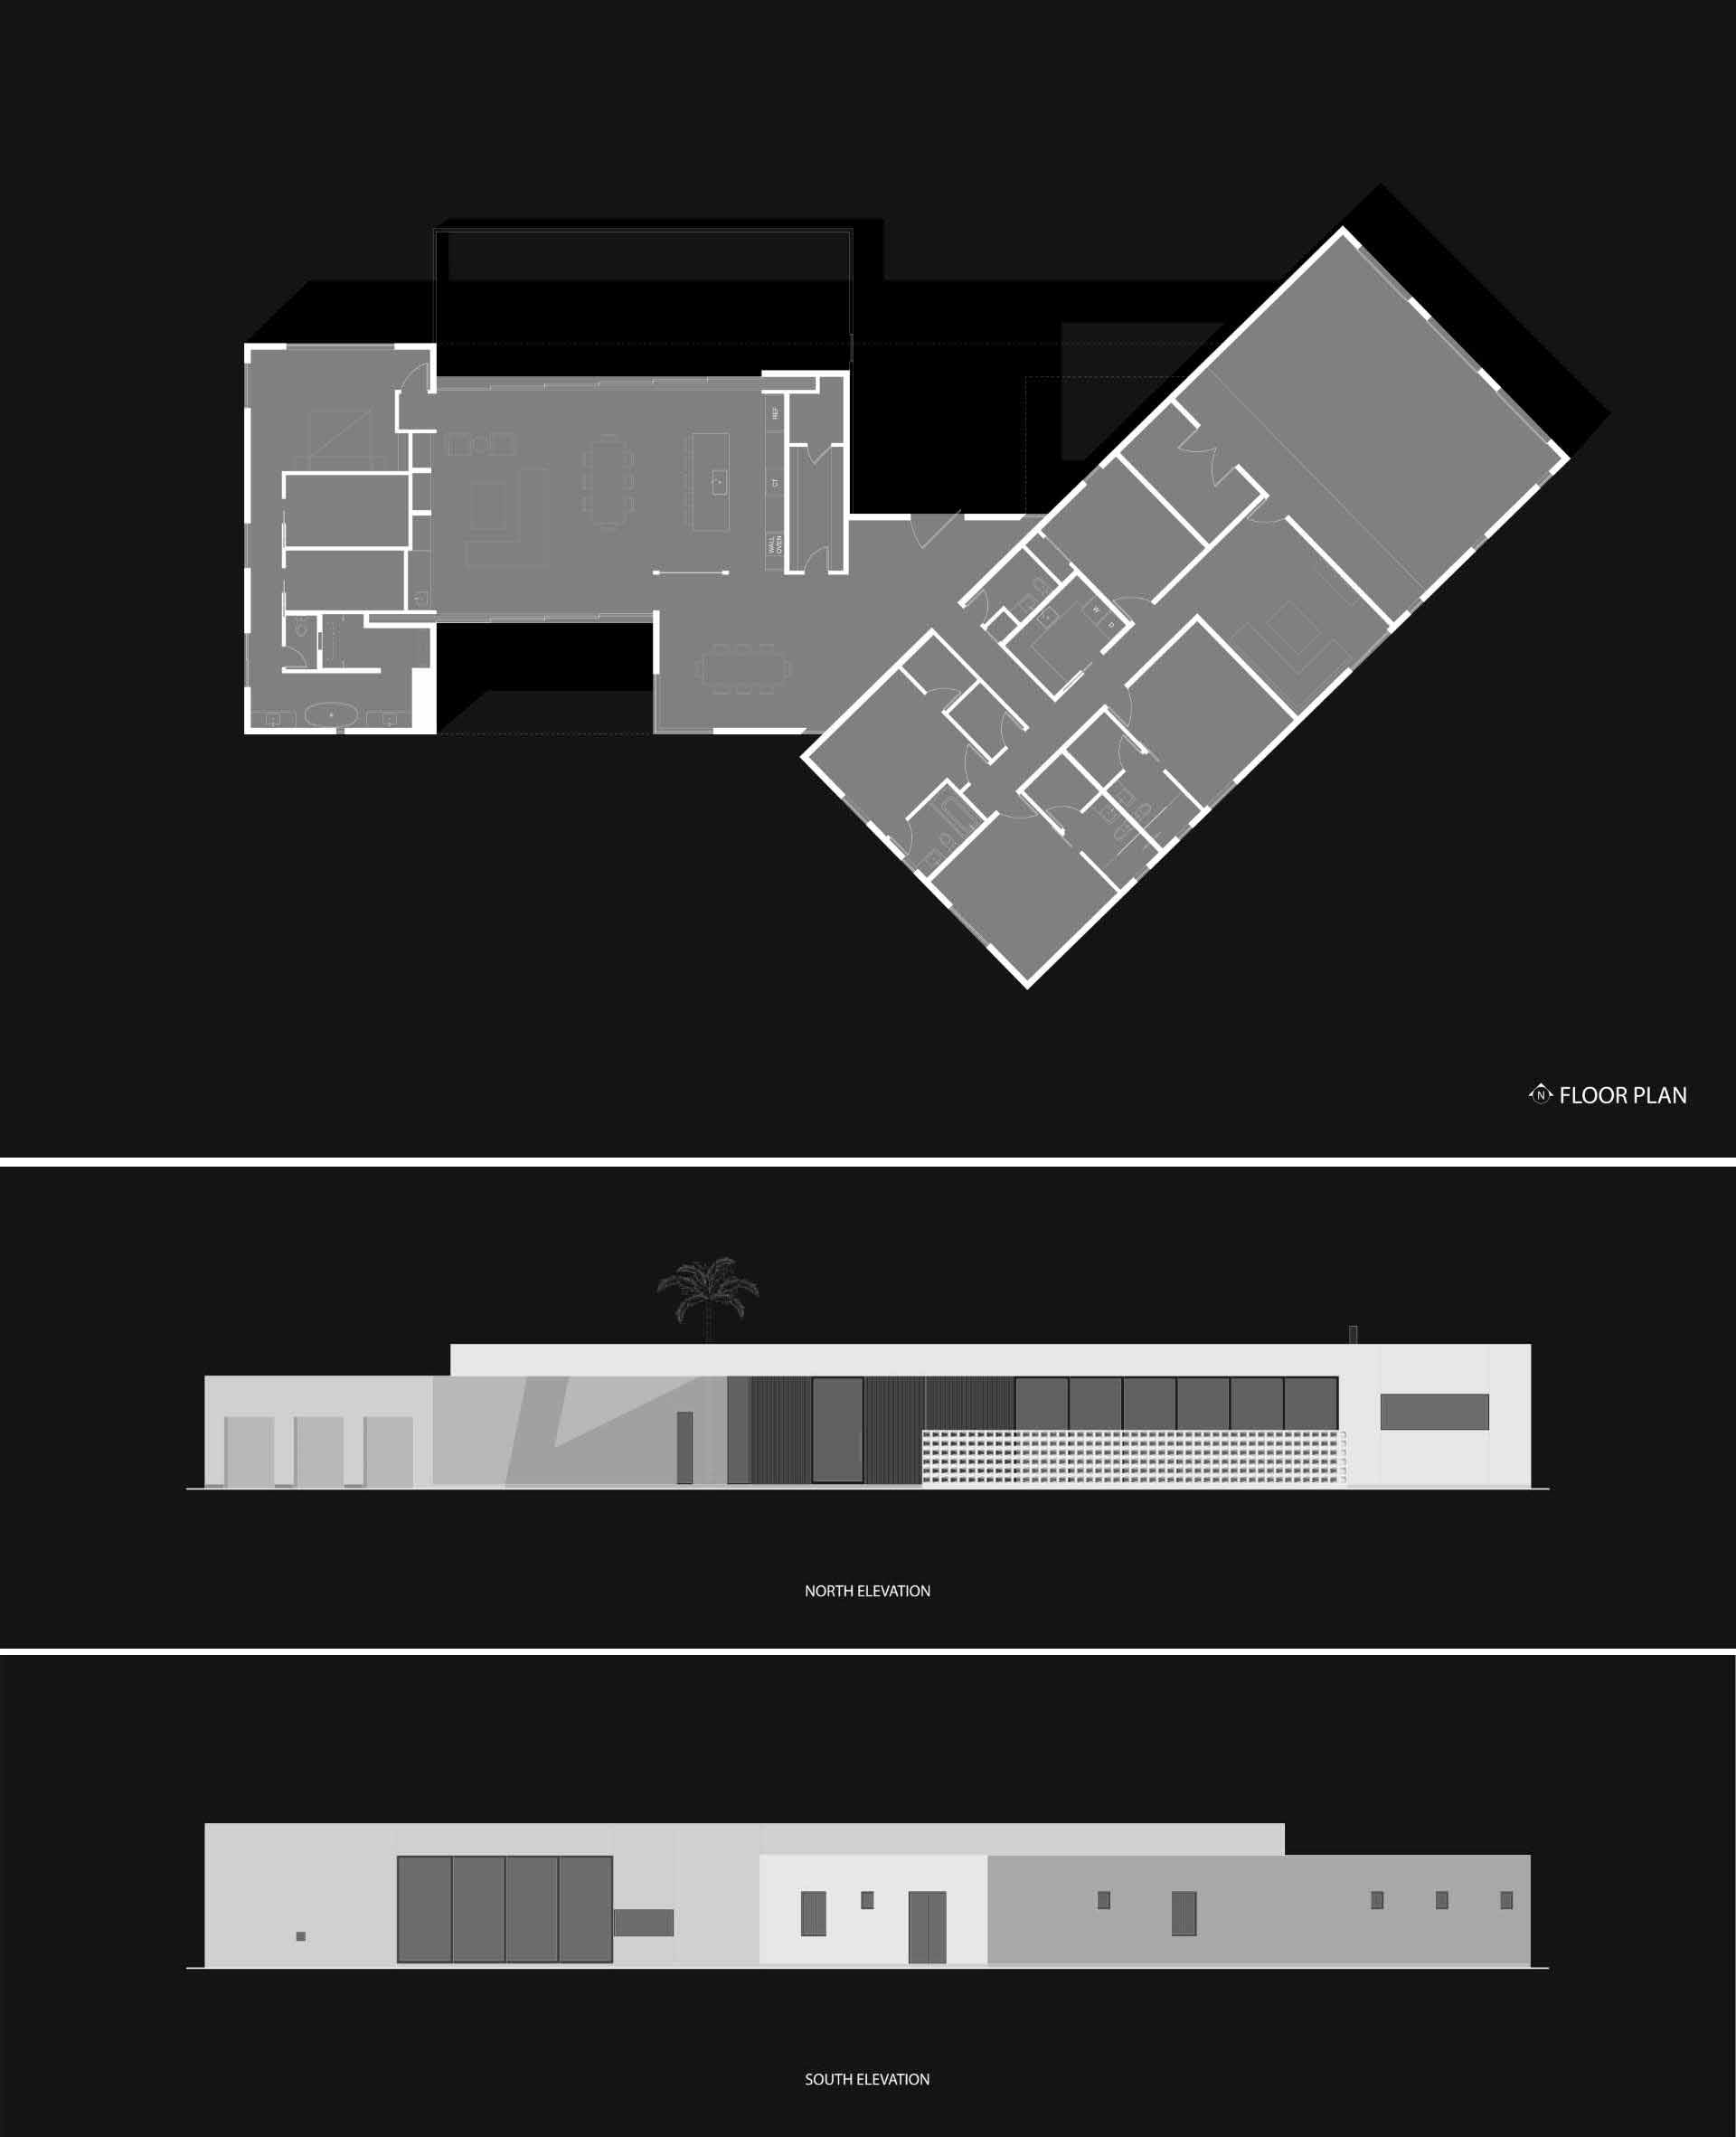 The architectural drawings of a modern home.